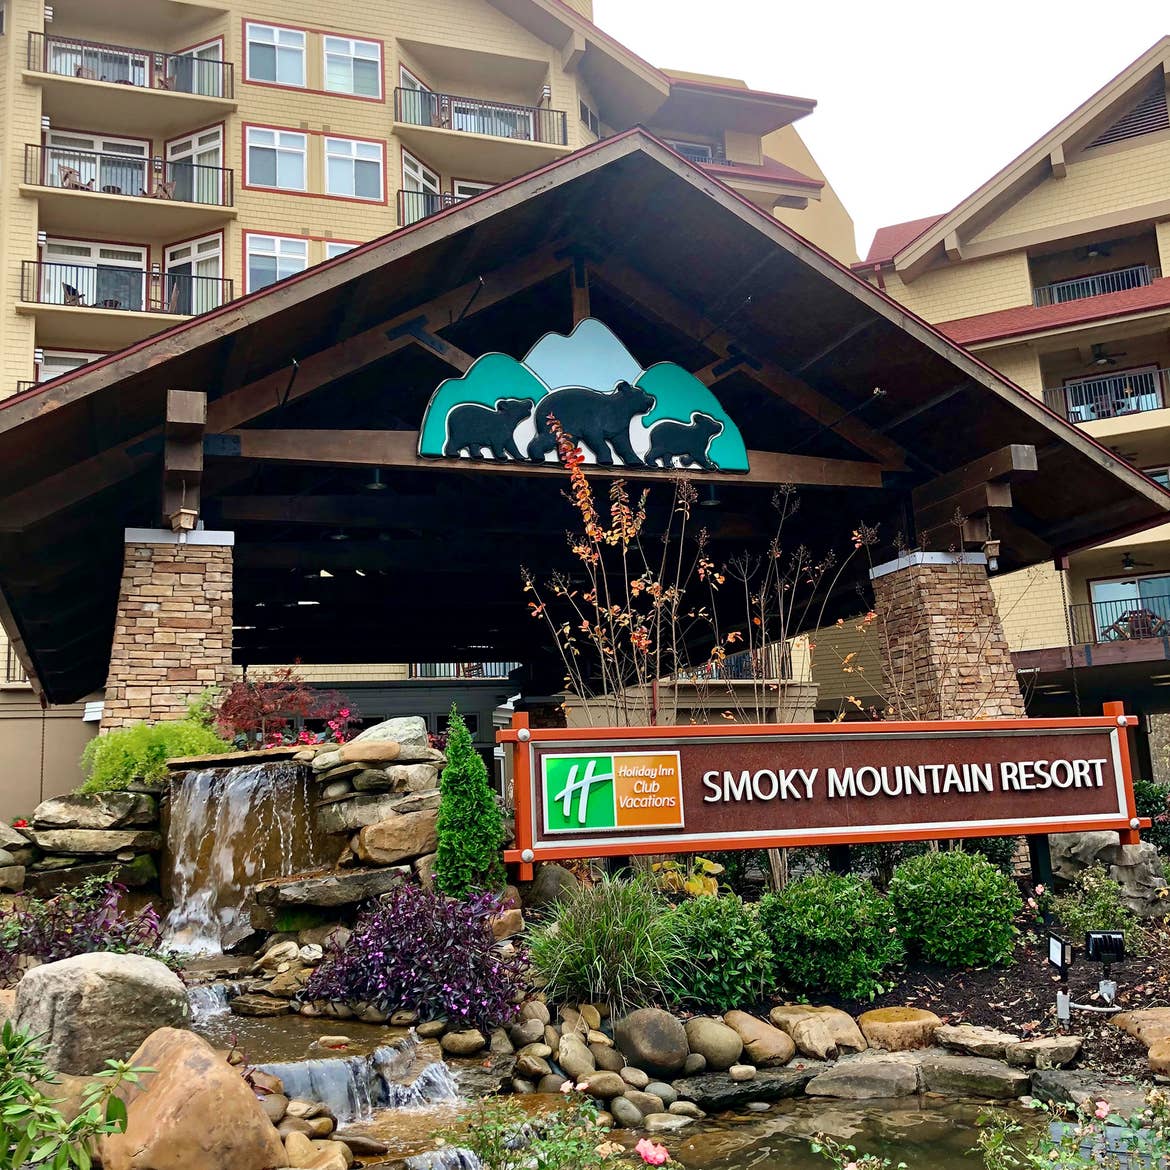 The exterior of our Smokey Moutain Resort located in Gatlinburg, Tennesee.